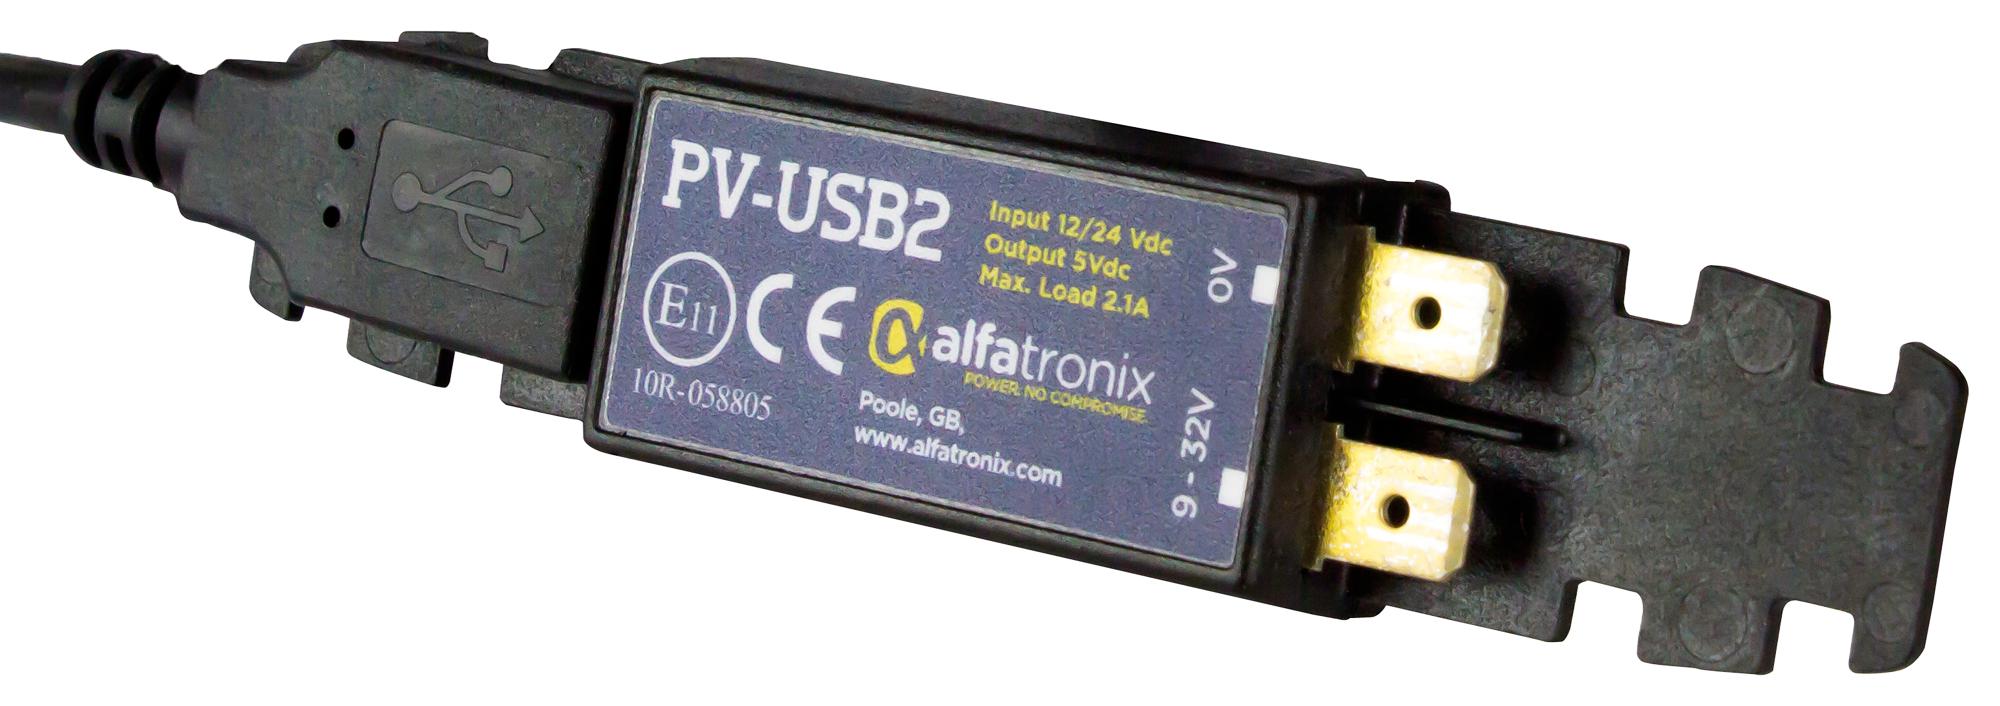 PV USB-2 USB CHARGER, 5V, DC WIRED ALFATRONIX